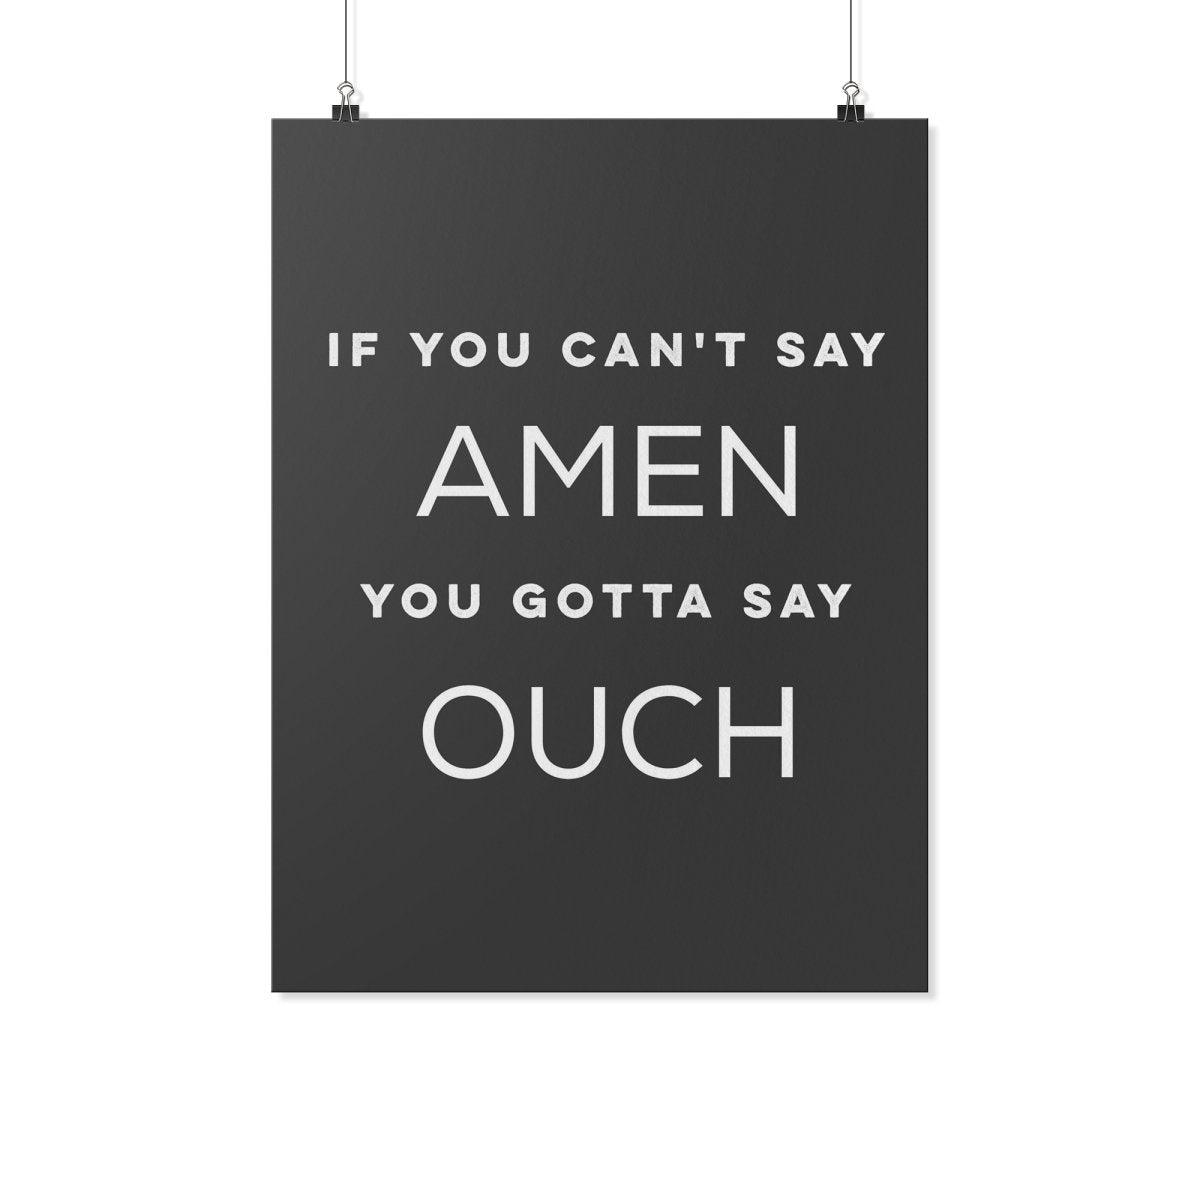 If You Can't Say Amen (Wall Poster) - SDG Clothing